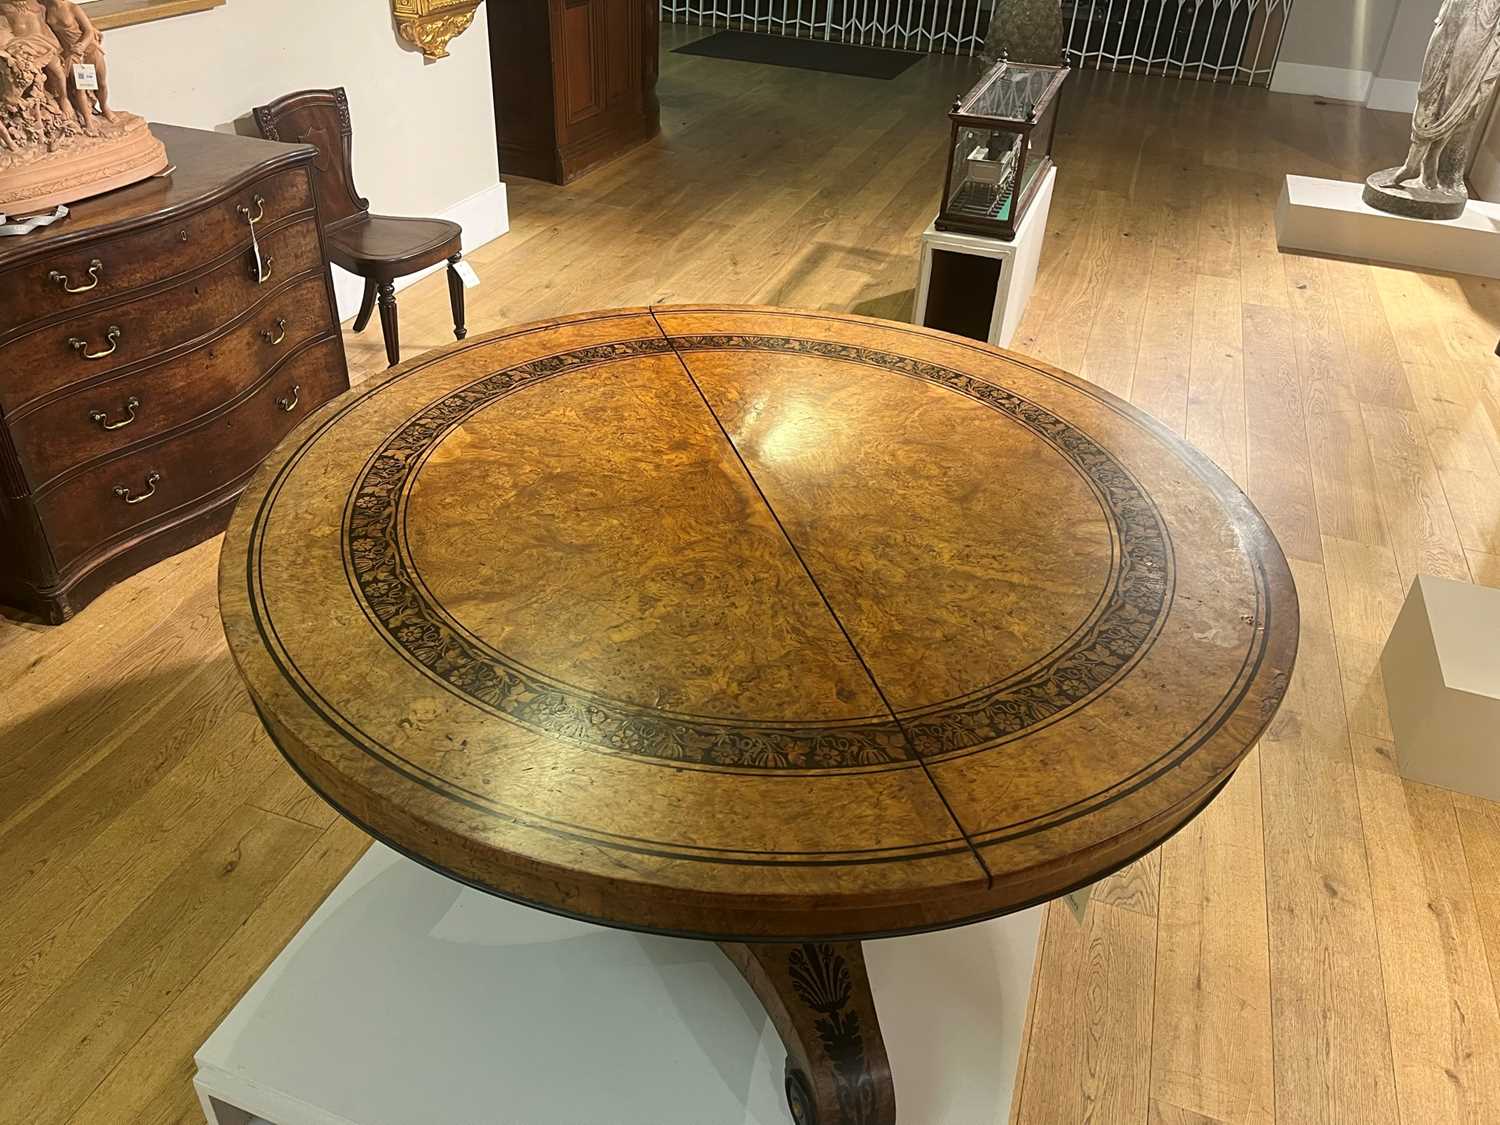 A Regency pollard oak, yew and ebony centre table attributed to George Bullock, - Image 25 of 51